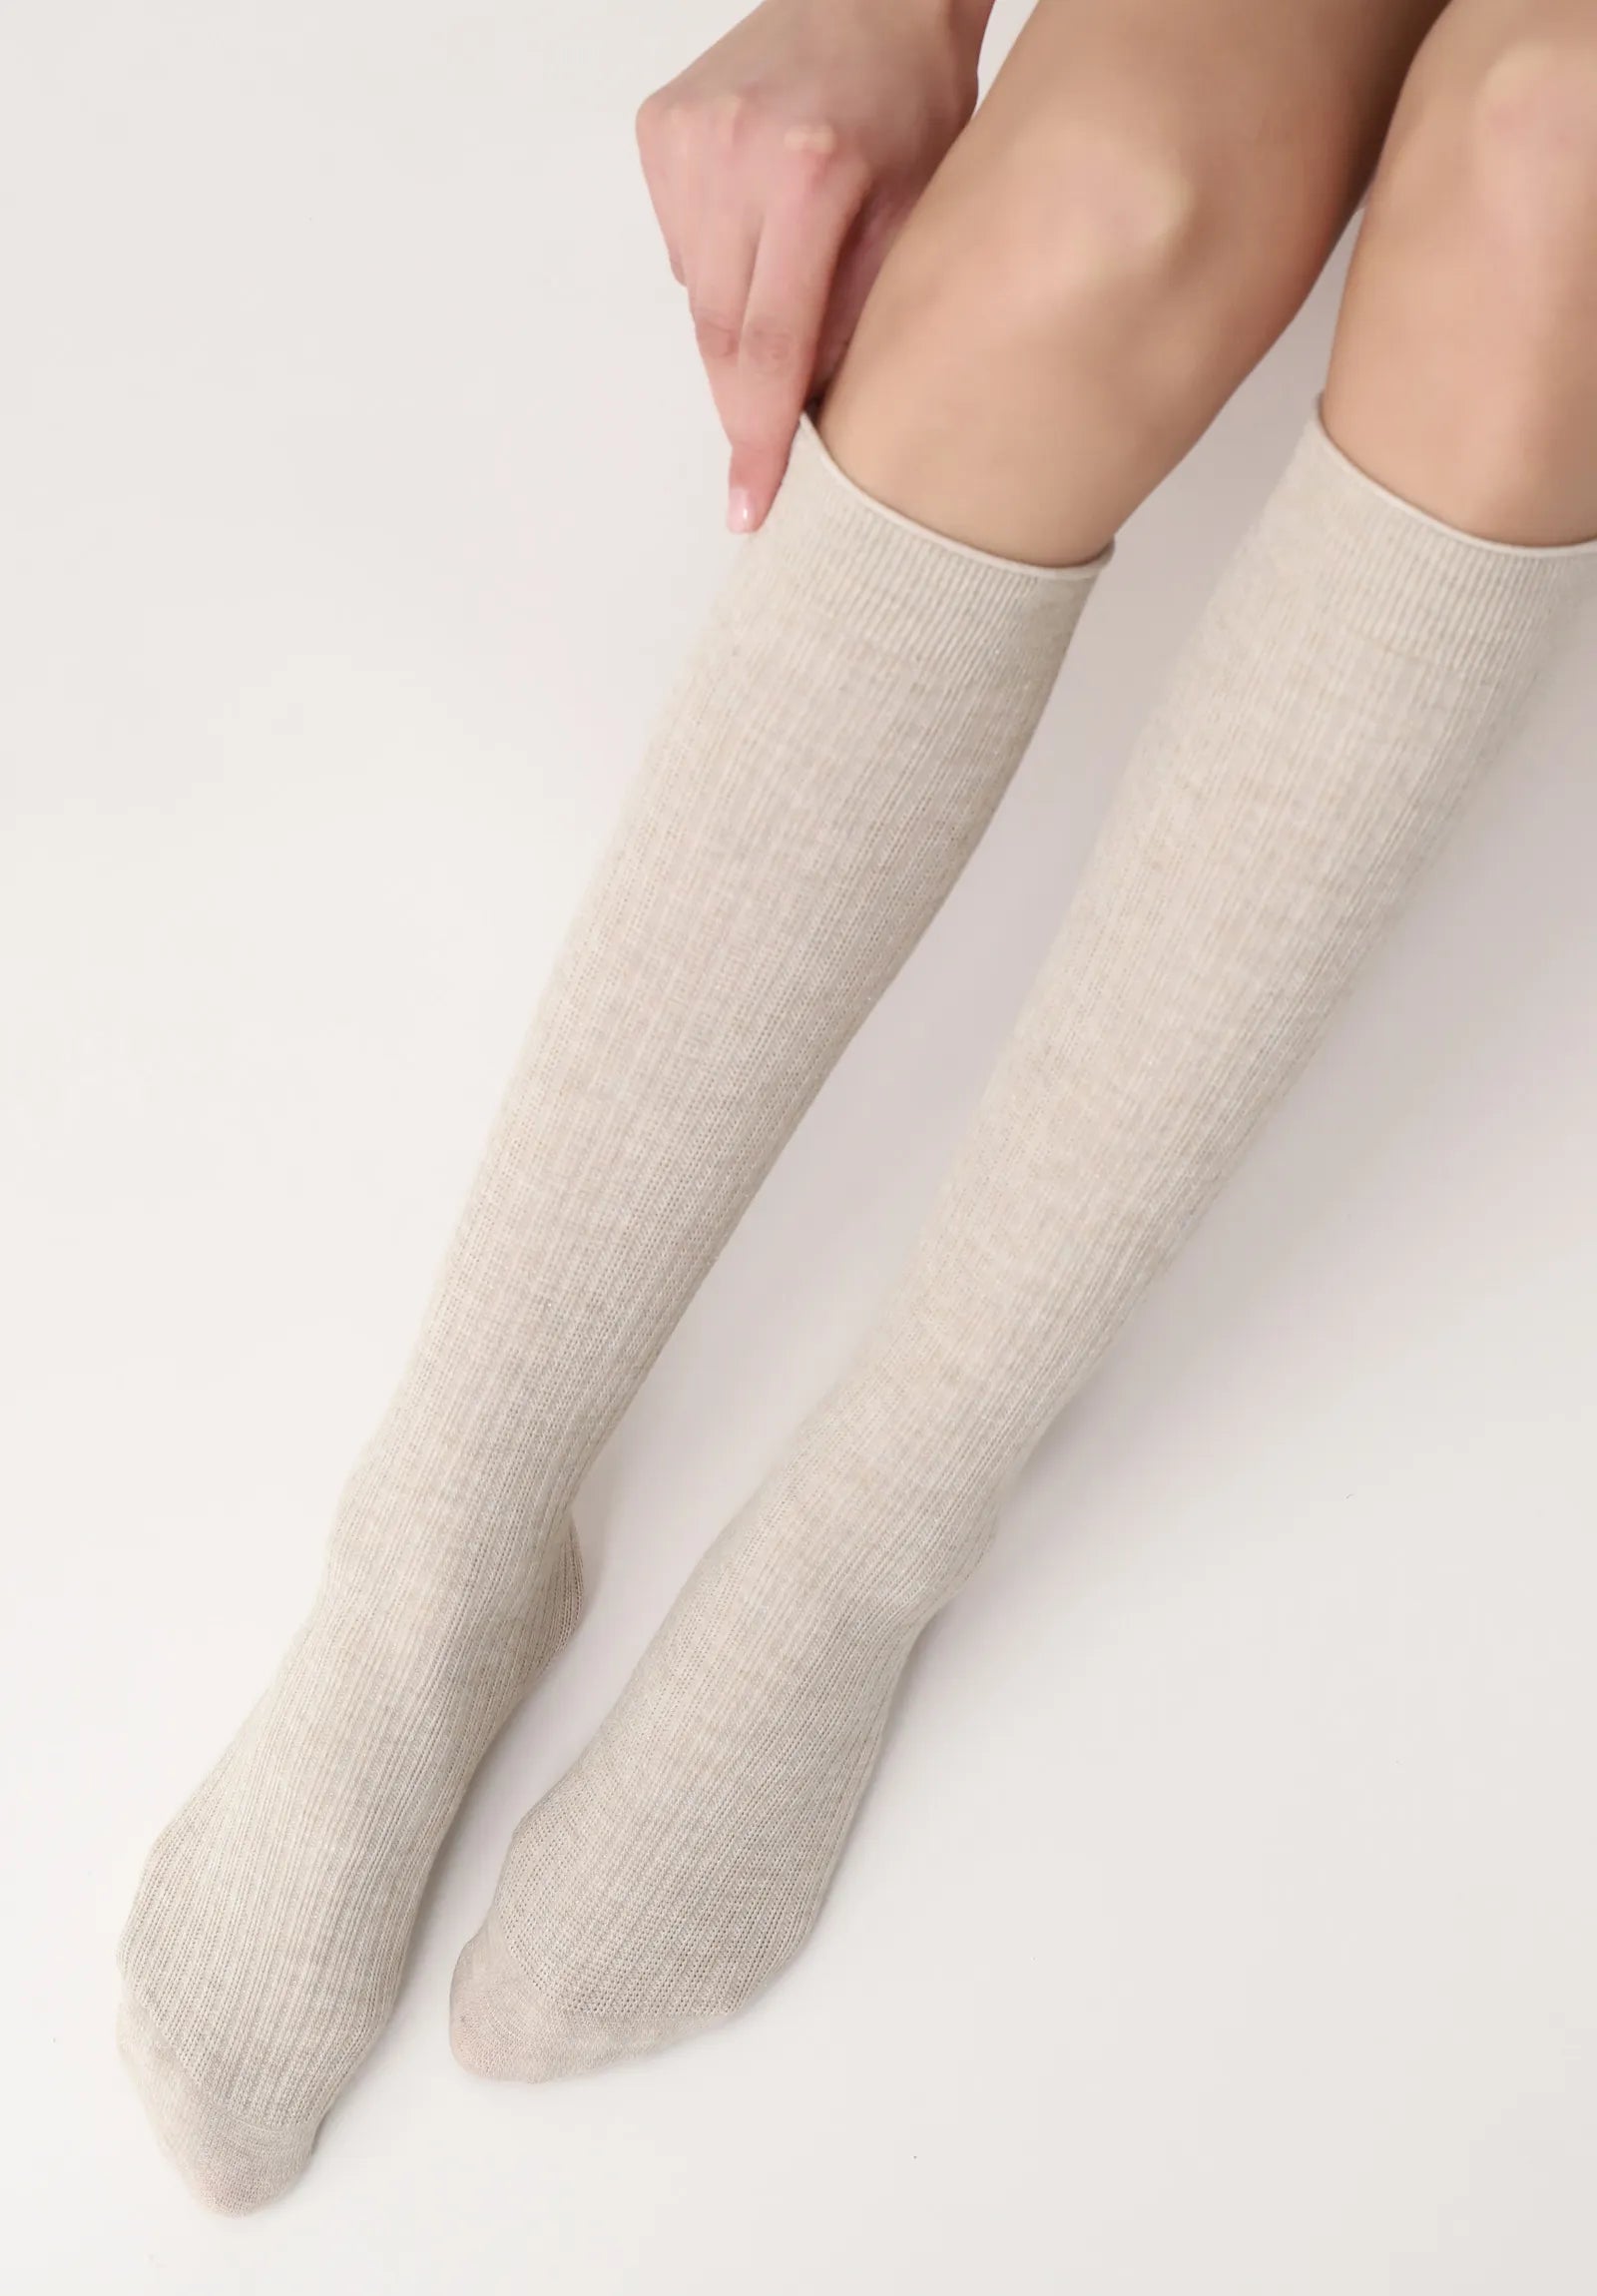 OroblÌ_ Soft Rib Knee-High - Ultra soft and warm thermal ribbed knitted knee length tube socks in beige.